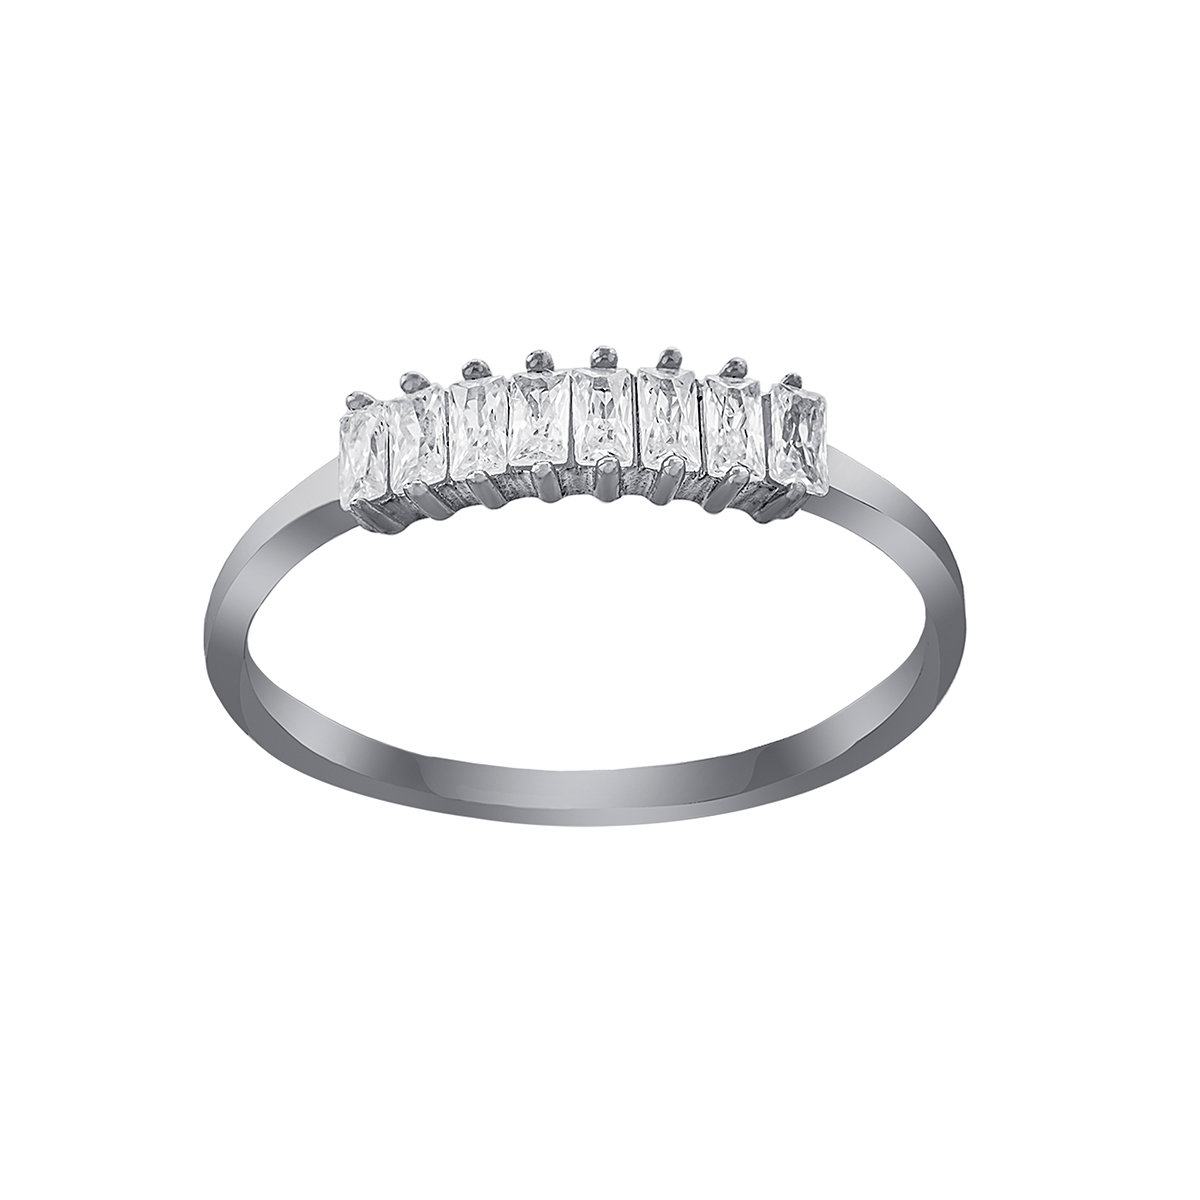 Athra Sterling Silver CZ Band Ring